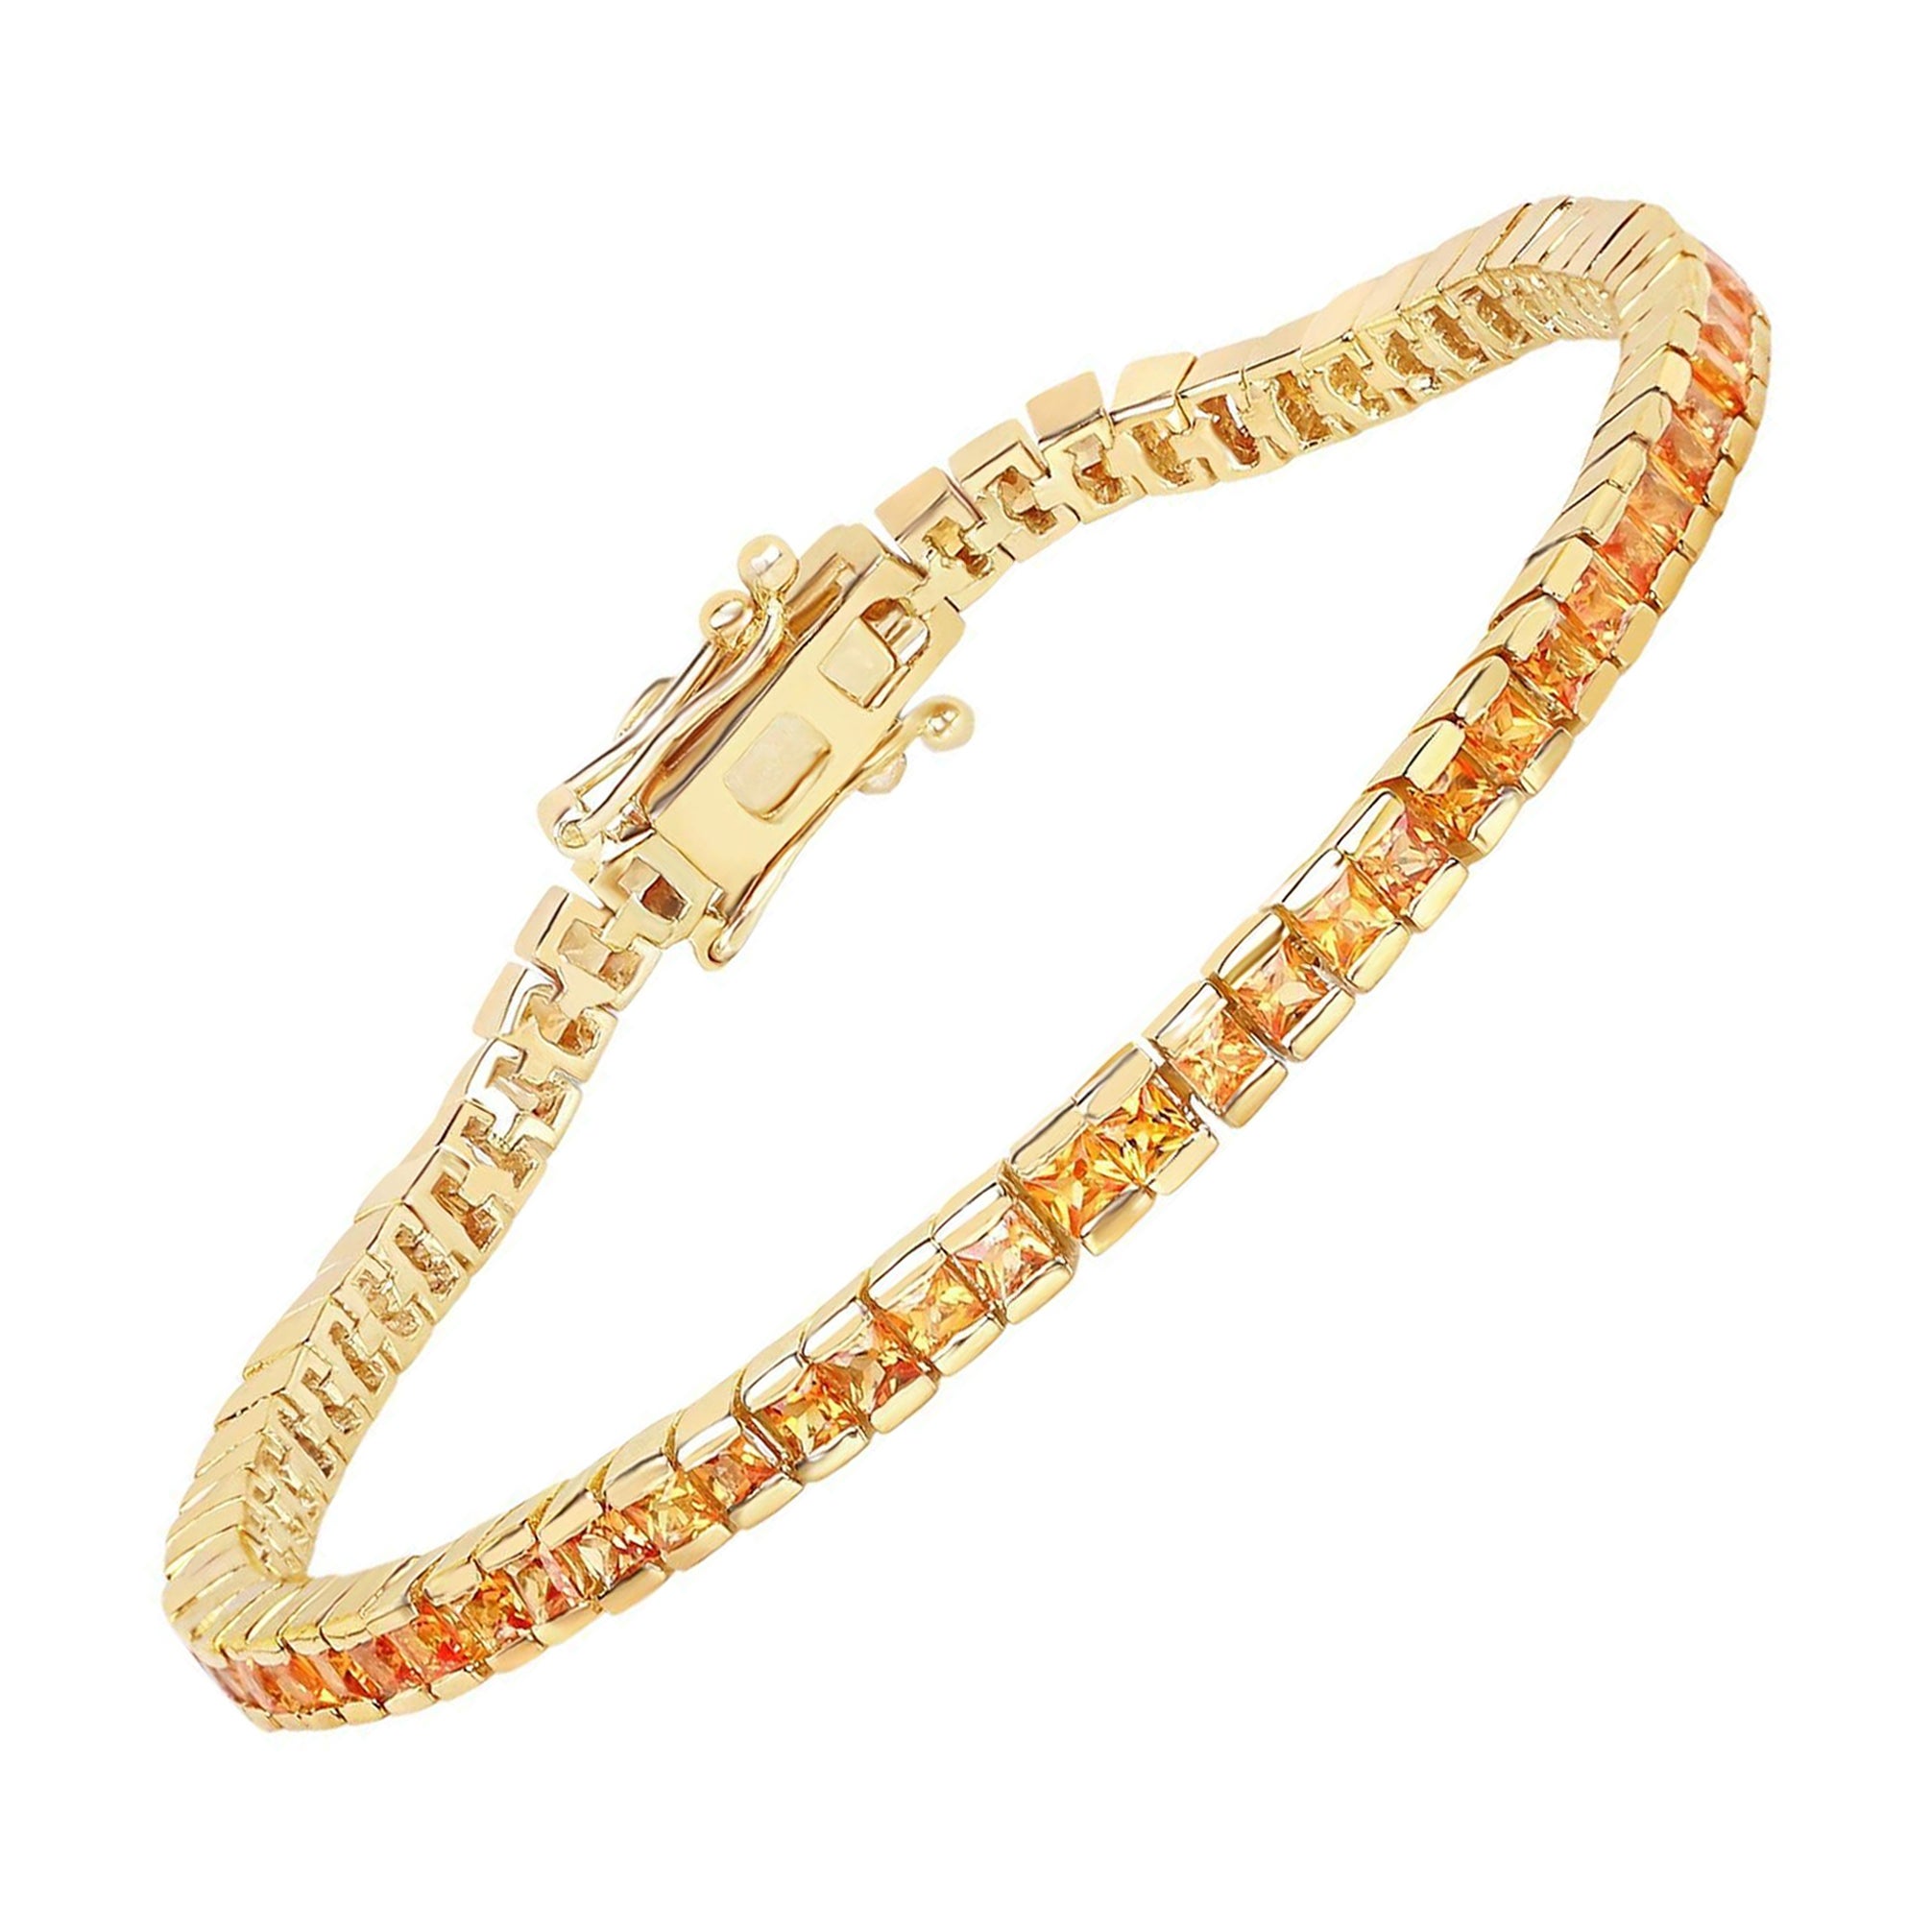 It comes with the appraisal by GIA GG/AJP
All Gemstones are Natural
69 Orange Sapphires = 6.21 Carats
Metal: 14K Yellow Gold Plated Silver
Length: 7.5 Inches